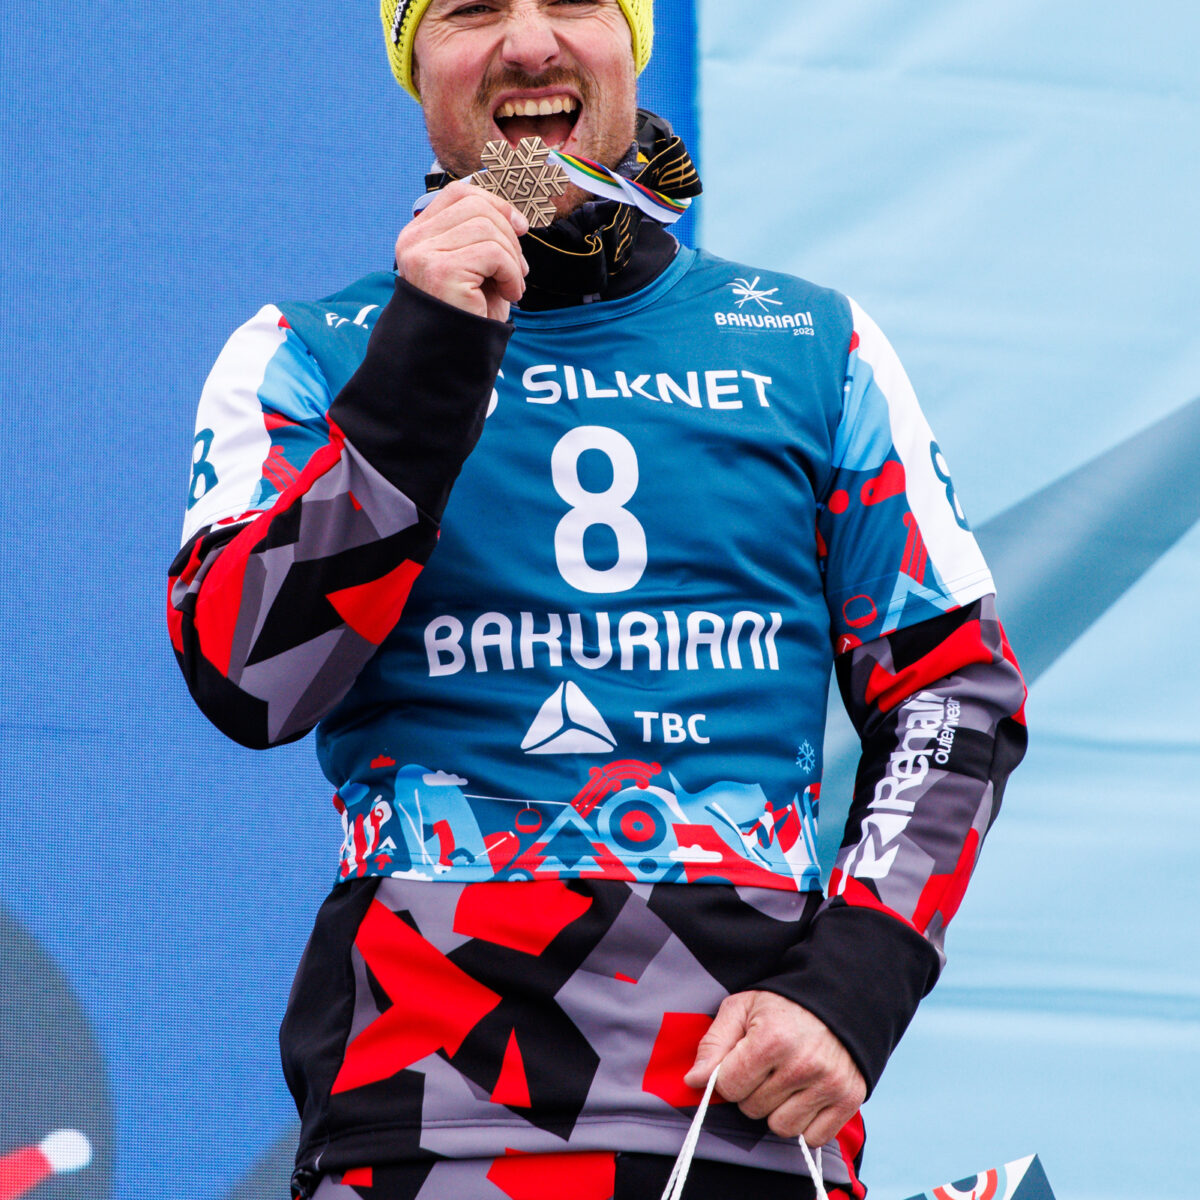 BAKURIANI,GEORGIA,19.FEB.23 - SNOWBOARD - FIS SX and SB World Championships, Parallel Giant Slalom, men, ladies, award ceremony. Image shows the rejoicing of Alexander Payer (AUT). Photo: GEPA pictures/ Matic Klansek